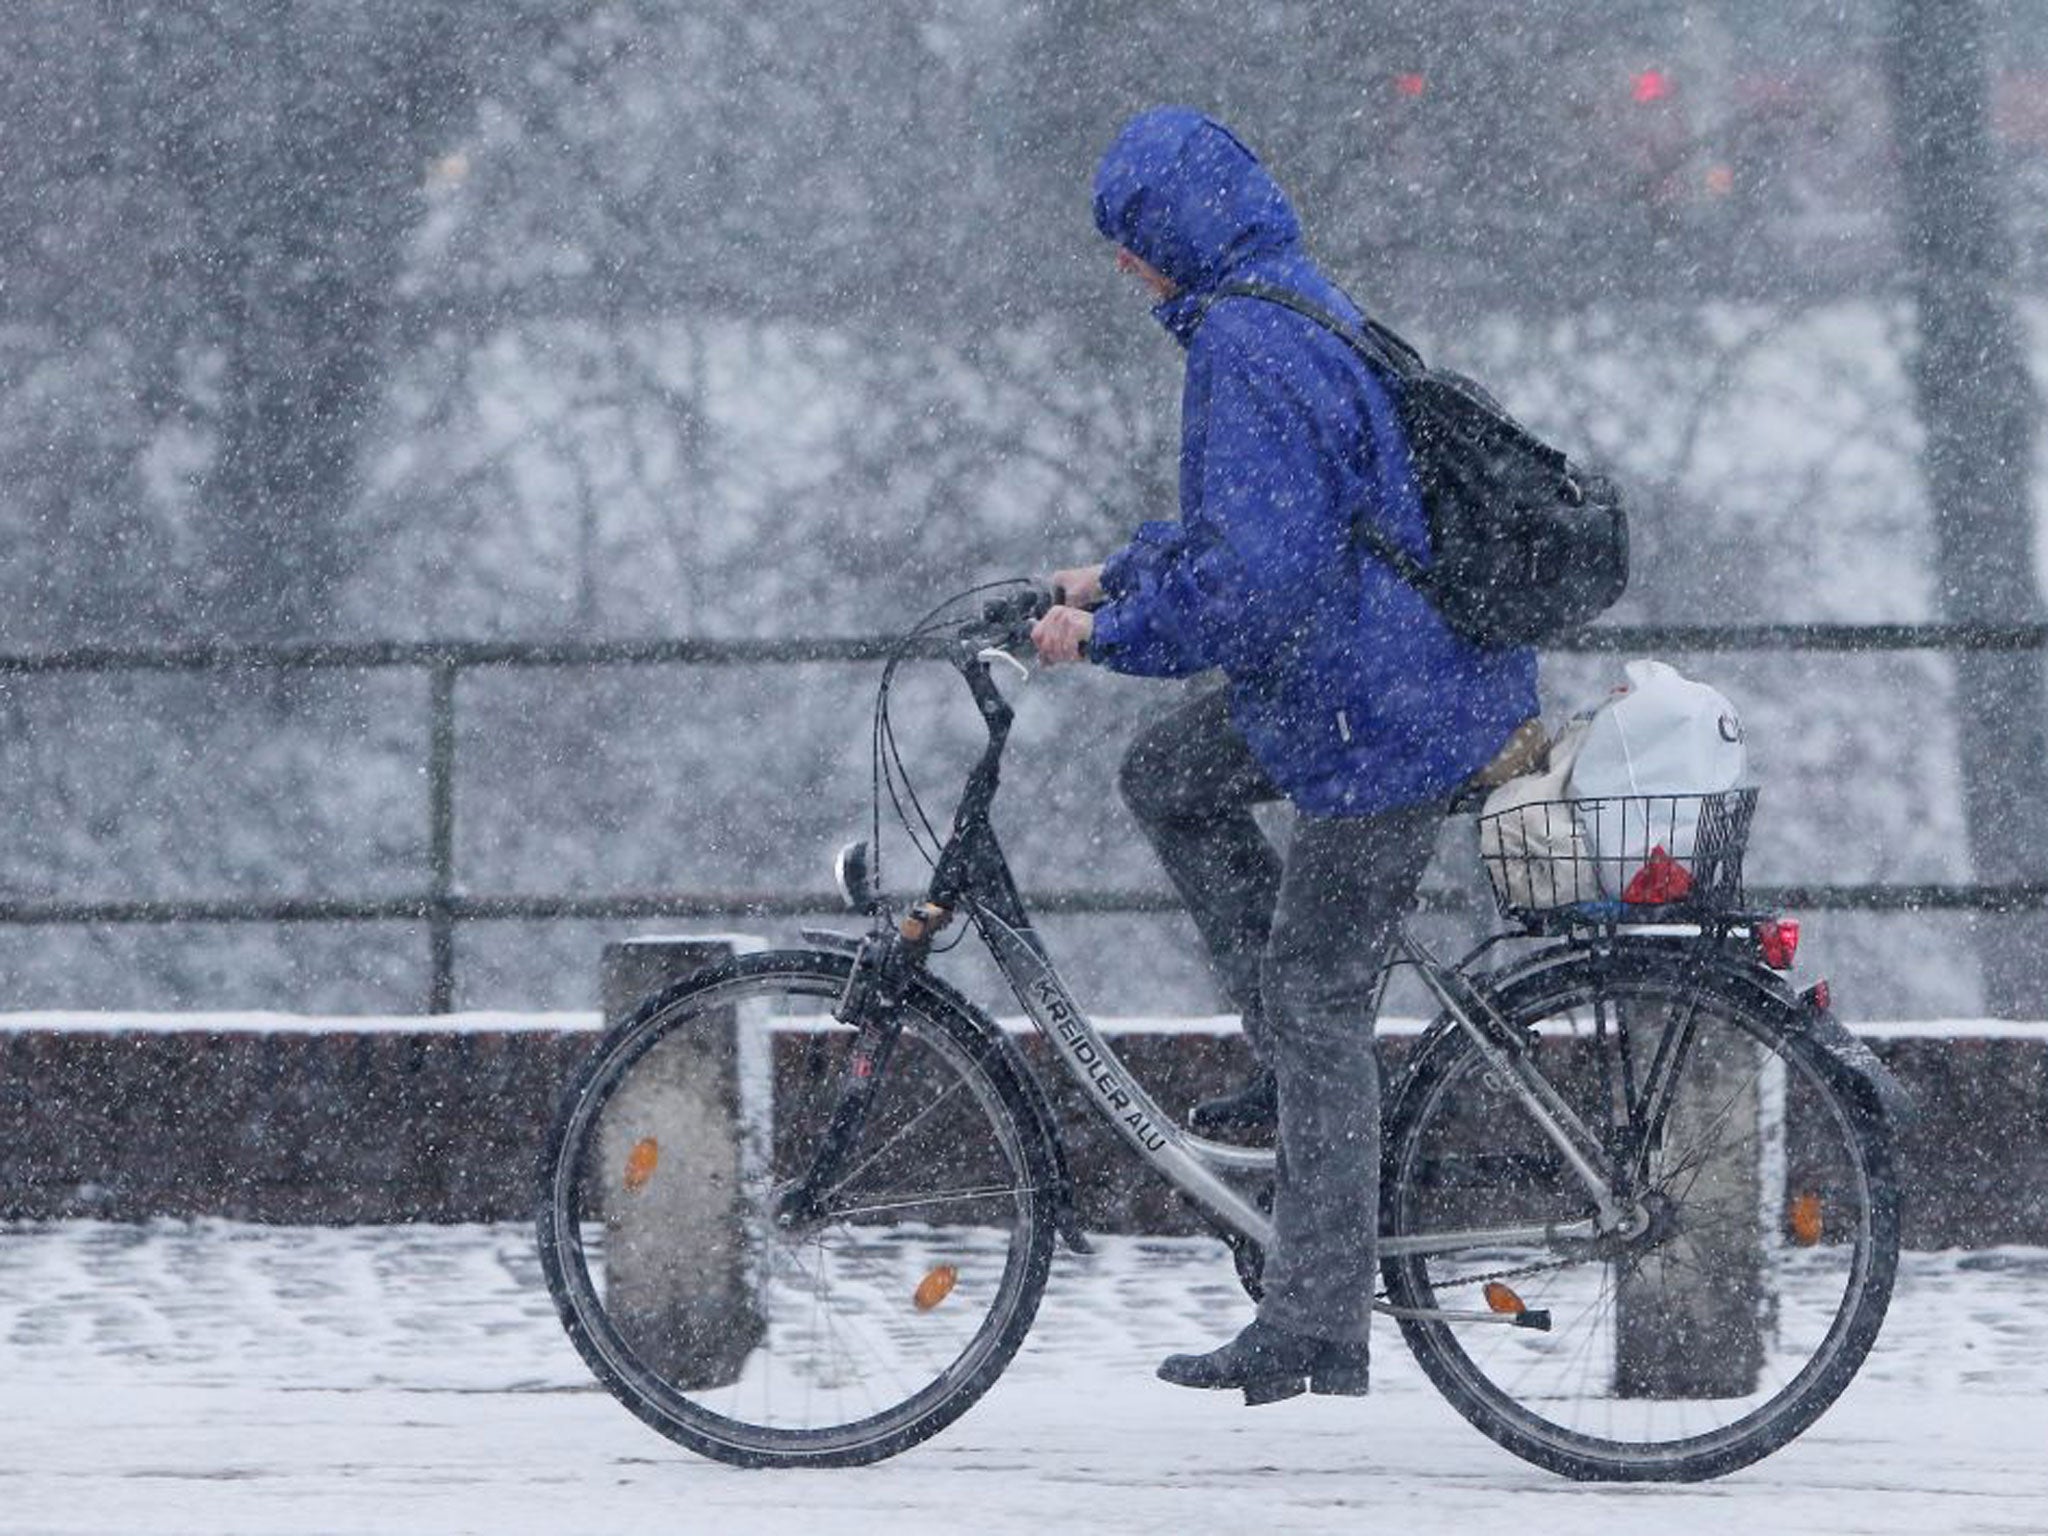 Snow is expected to fall across the country as plummeting temperatures usher in a cold snap